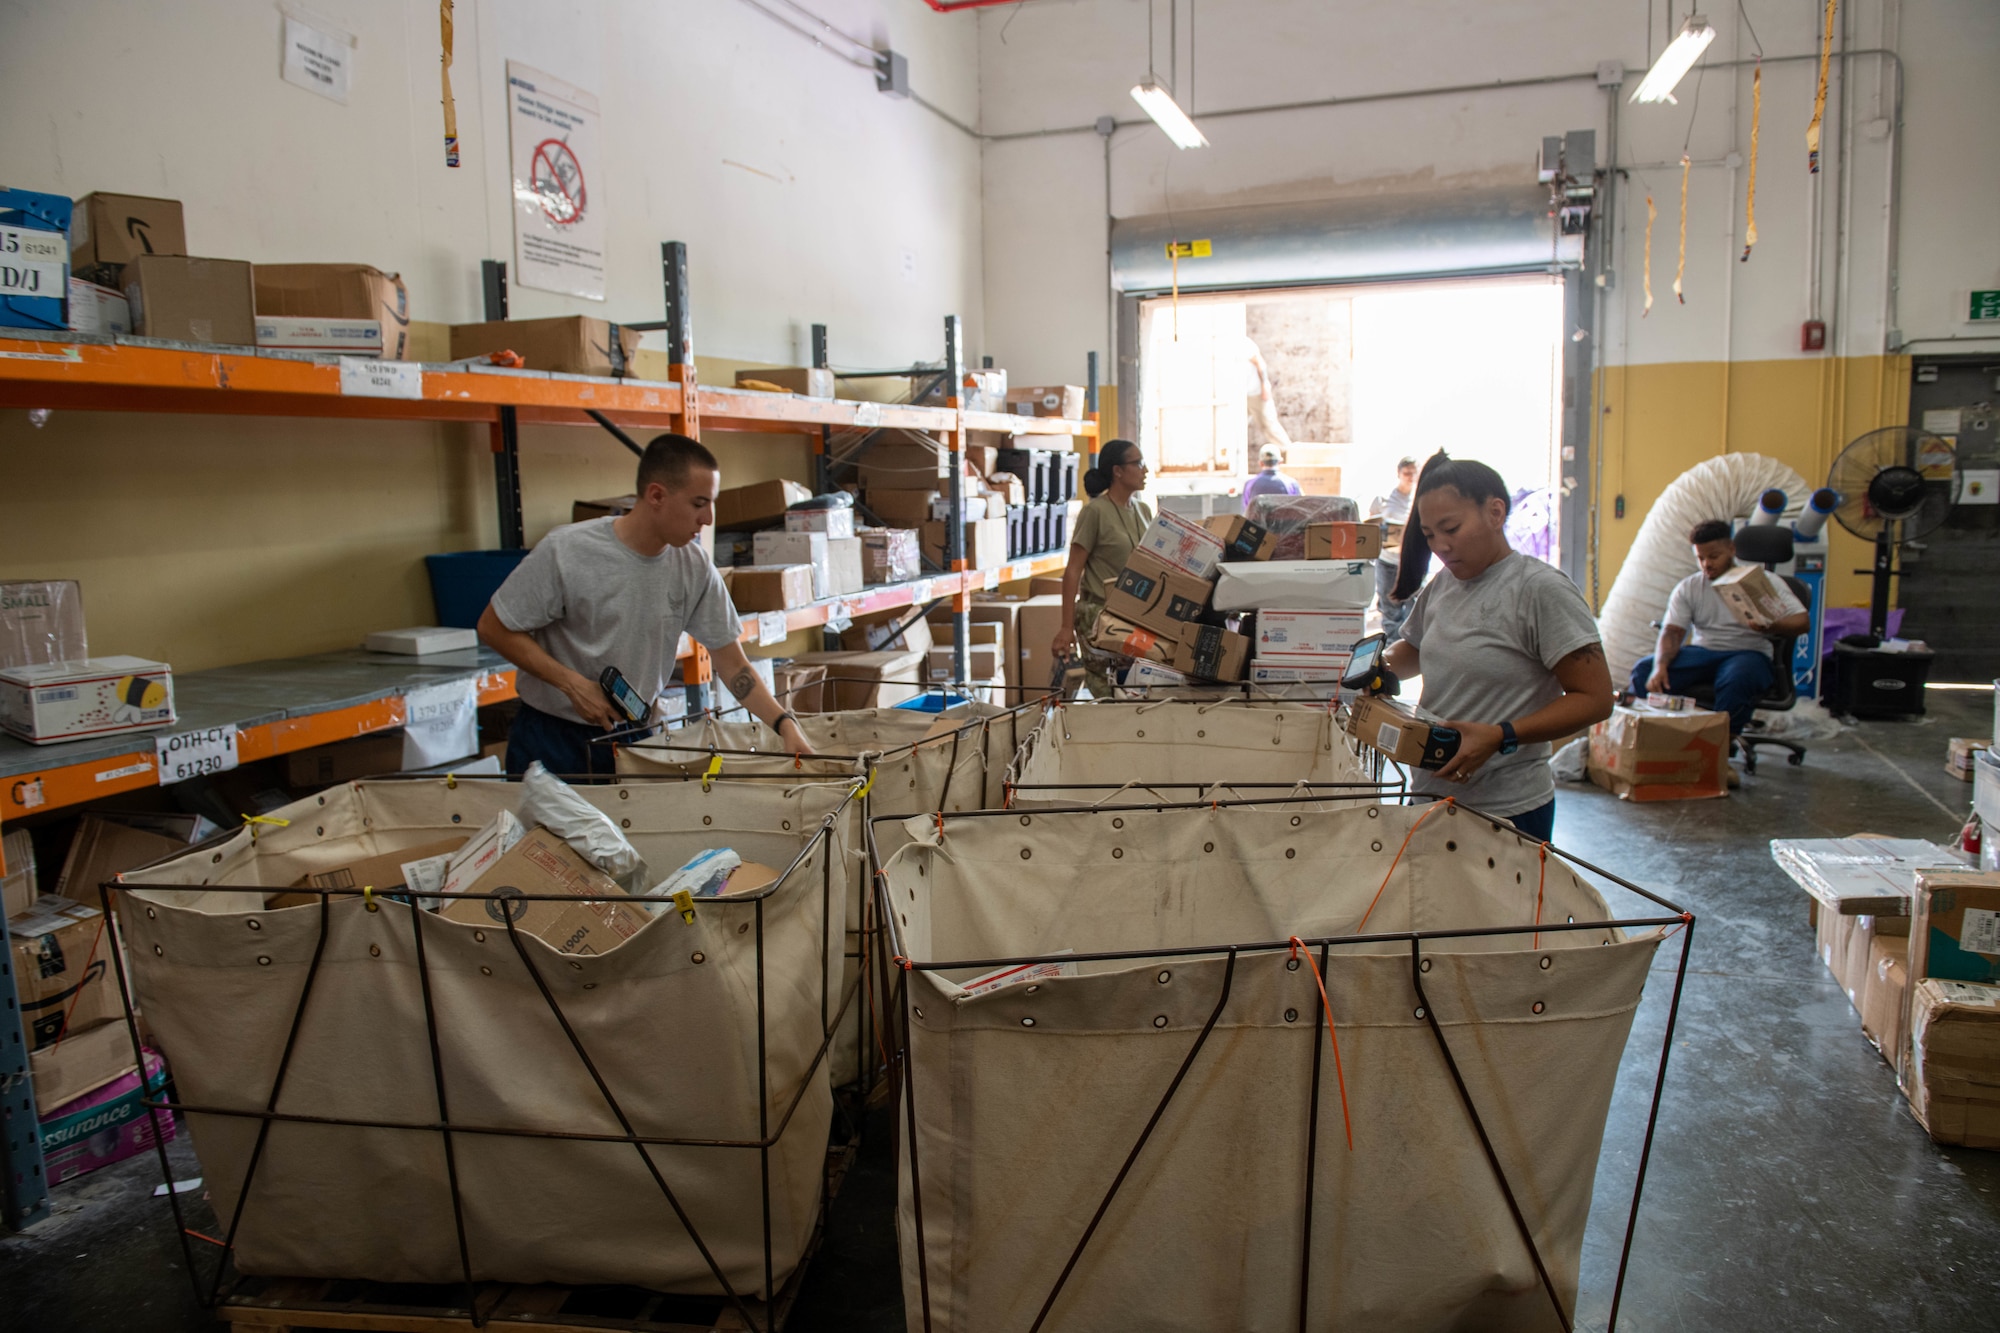 U.S. Air Force military postal clerks from the 379th Expeditionary Force Support Squadron organize incoming mail into bins at Al Udeid Air Base, Qatar, Sept. 1, 2022. Mail must be unloaded and organized every day. (U.S. Air National Guard photo by Airman 1st Class Constantine Bambakidis)